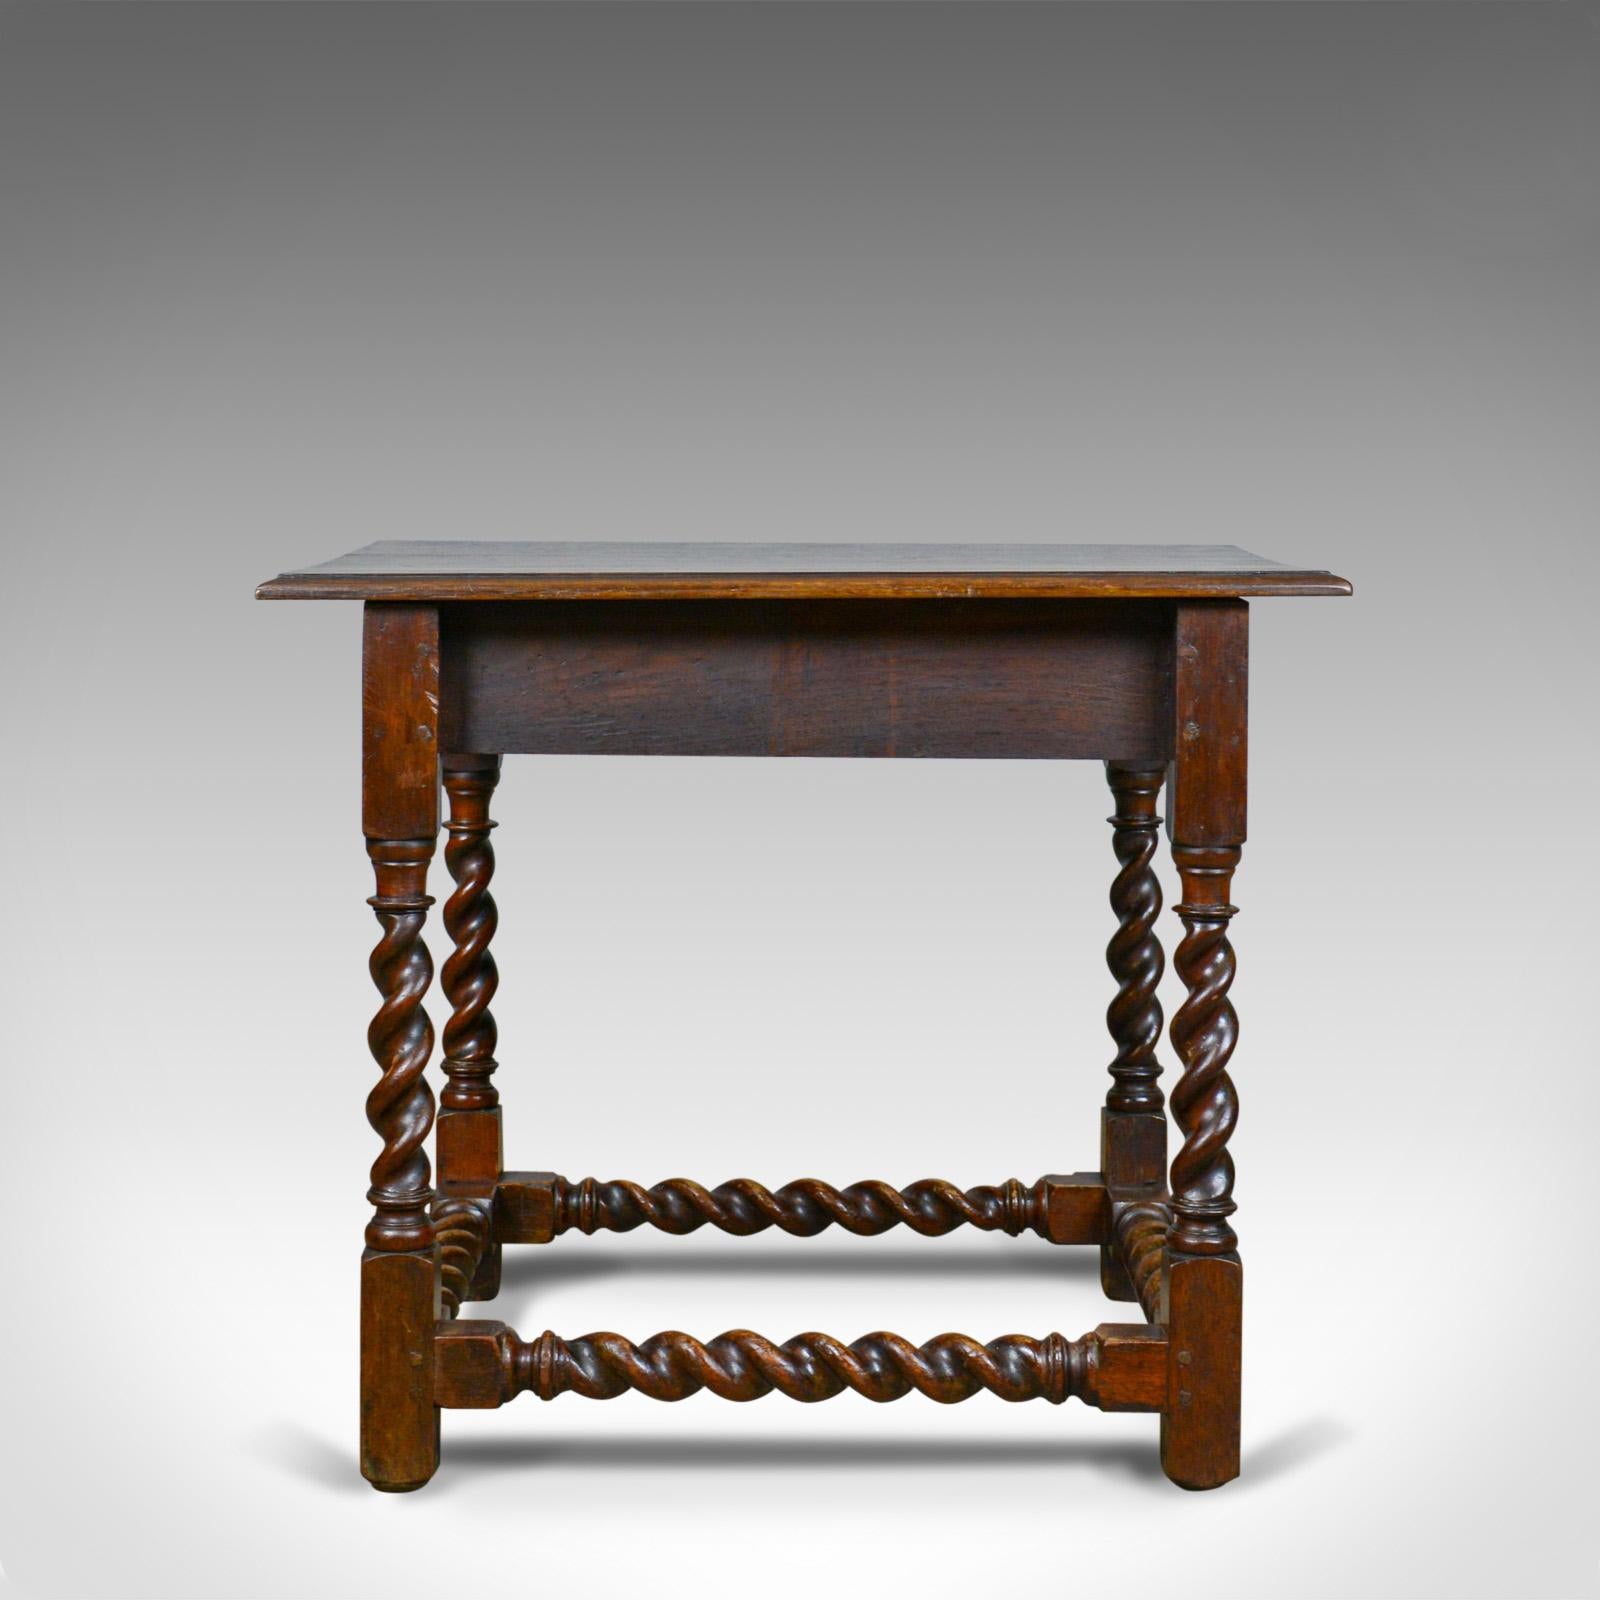 This is an antique side table. A Victorian, English, oak table dating to the late 19th century, circa 1880.

Broad top displays well featuring edge moulding
Good consistent color with a wax polished finish
Displaying a desirable aged